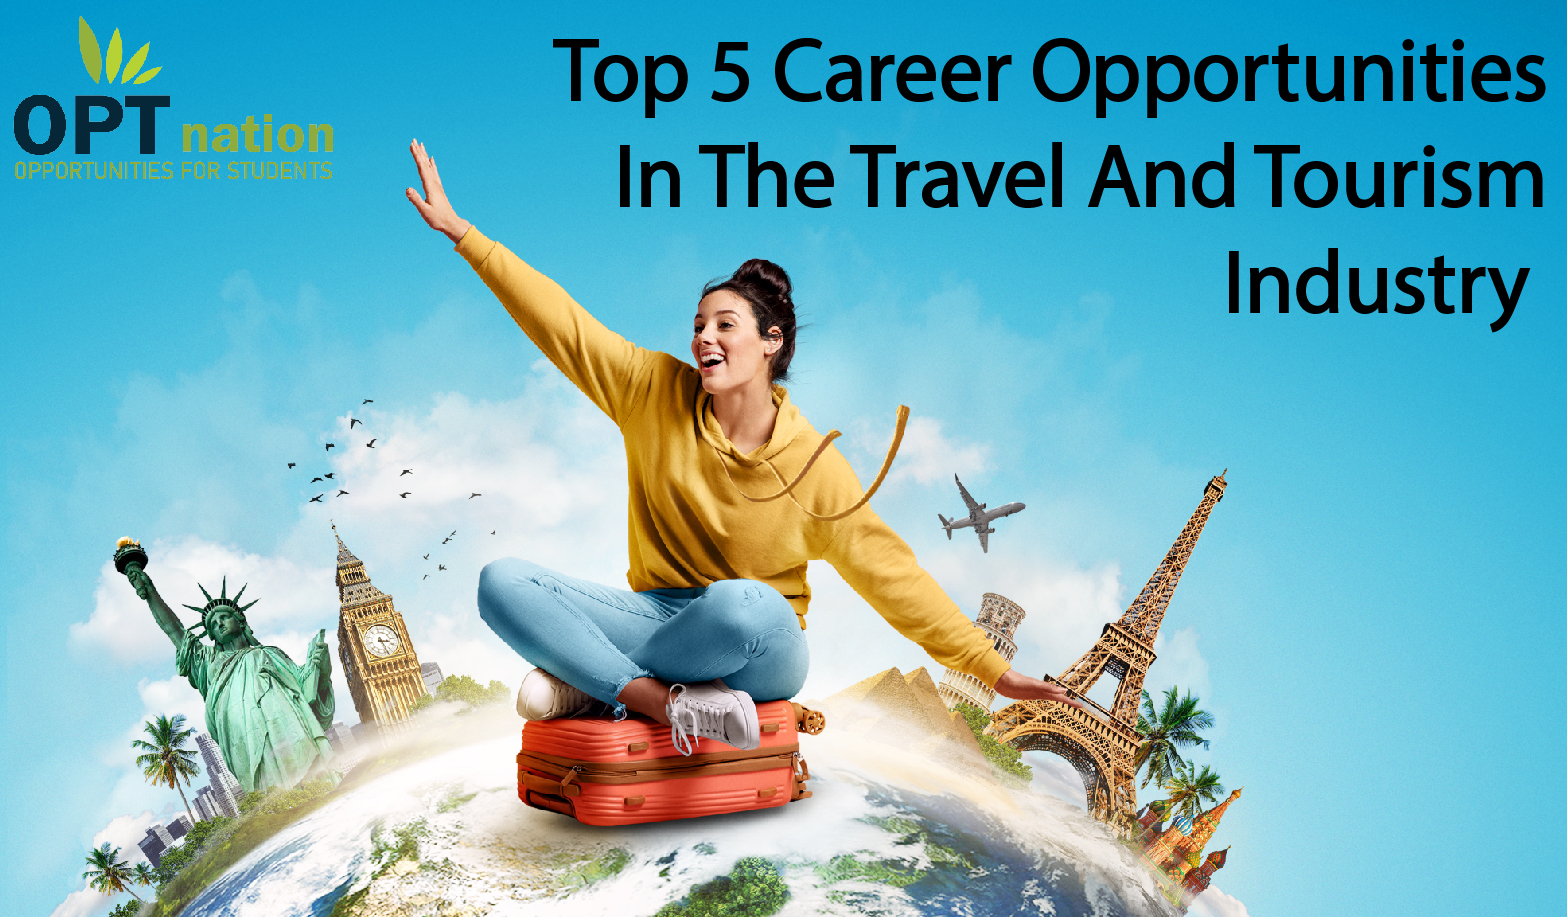 travel and tourism industry careers